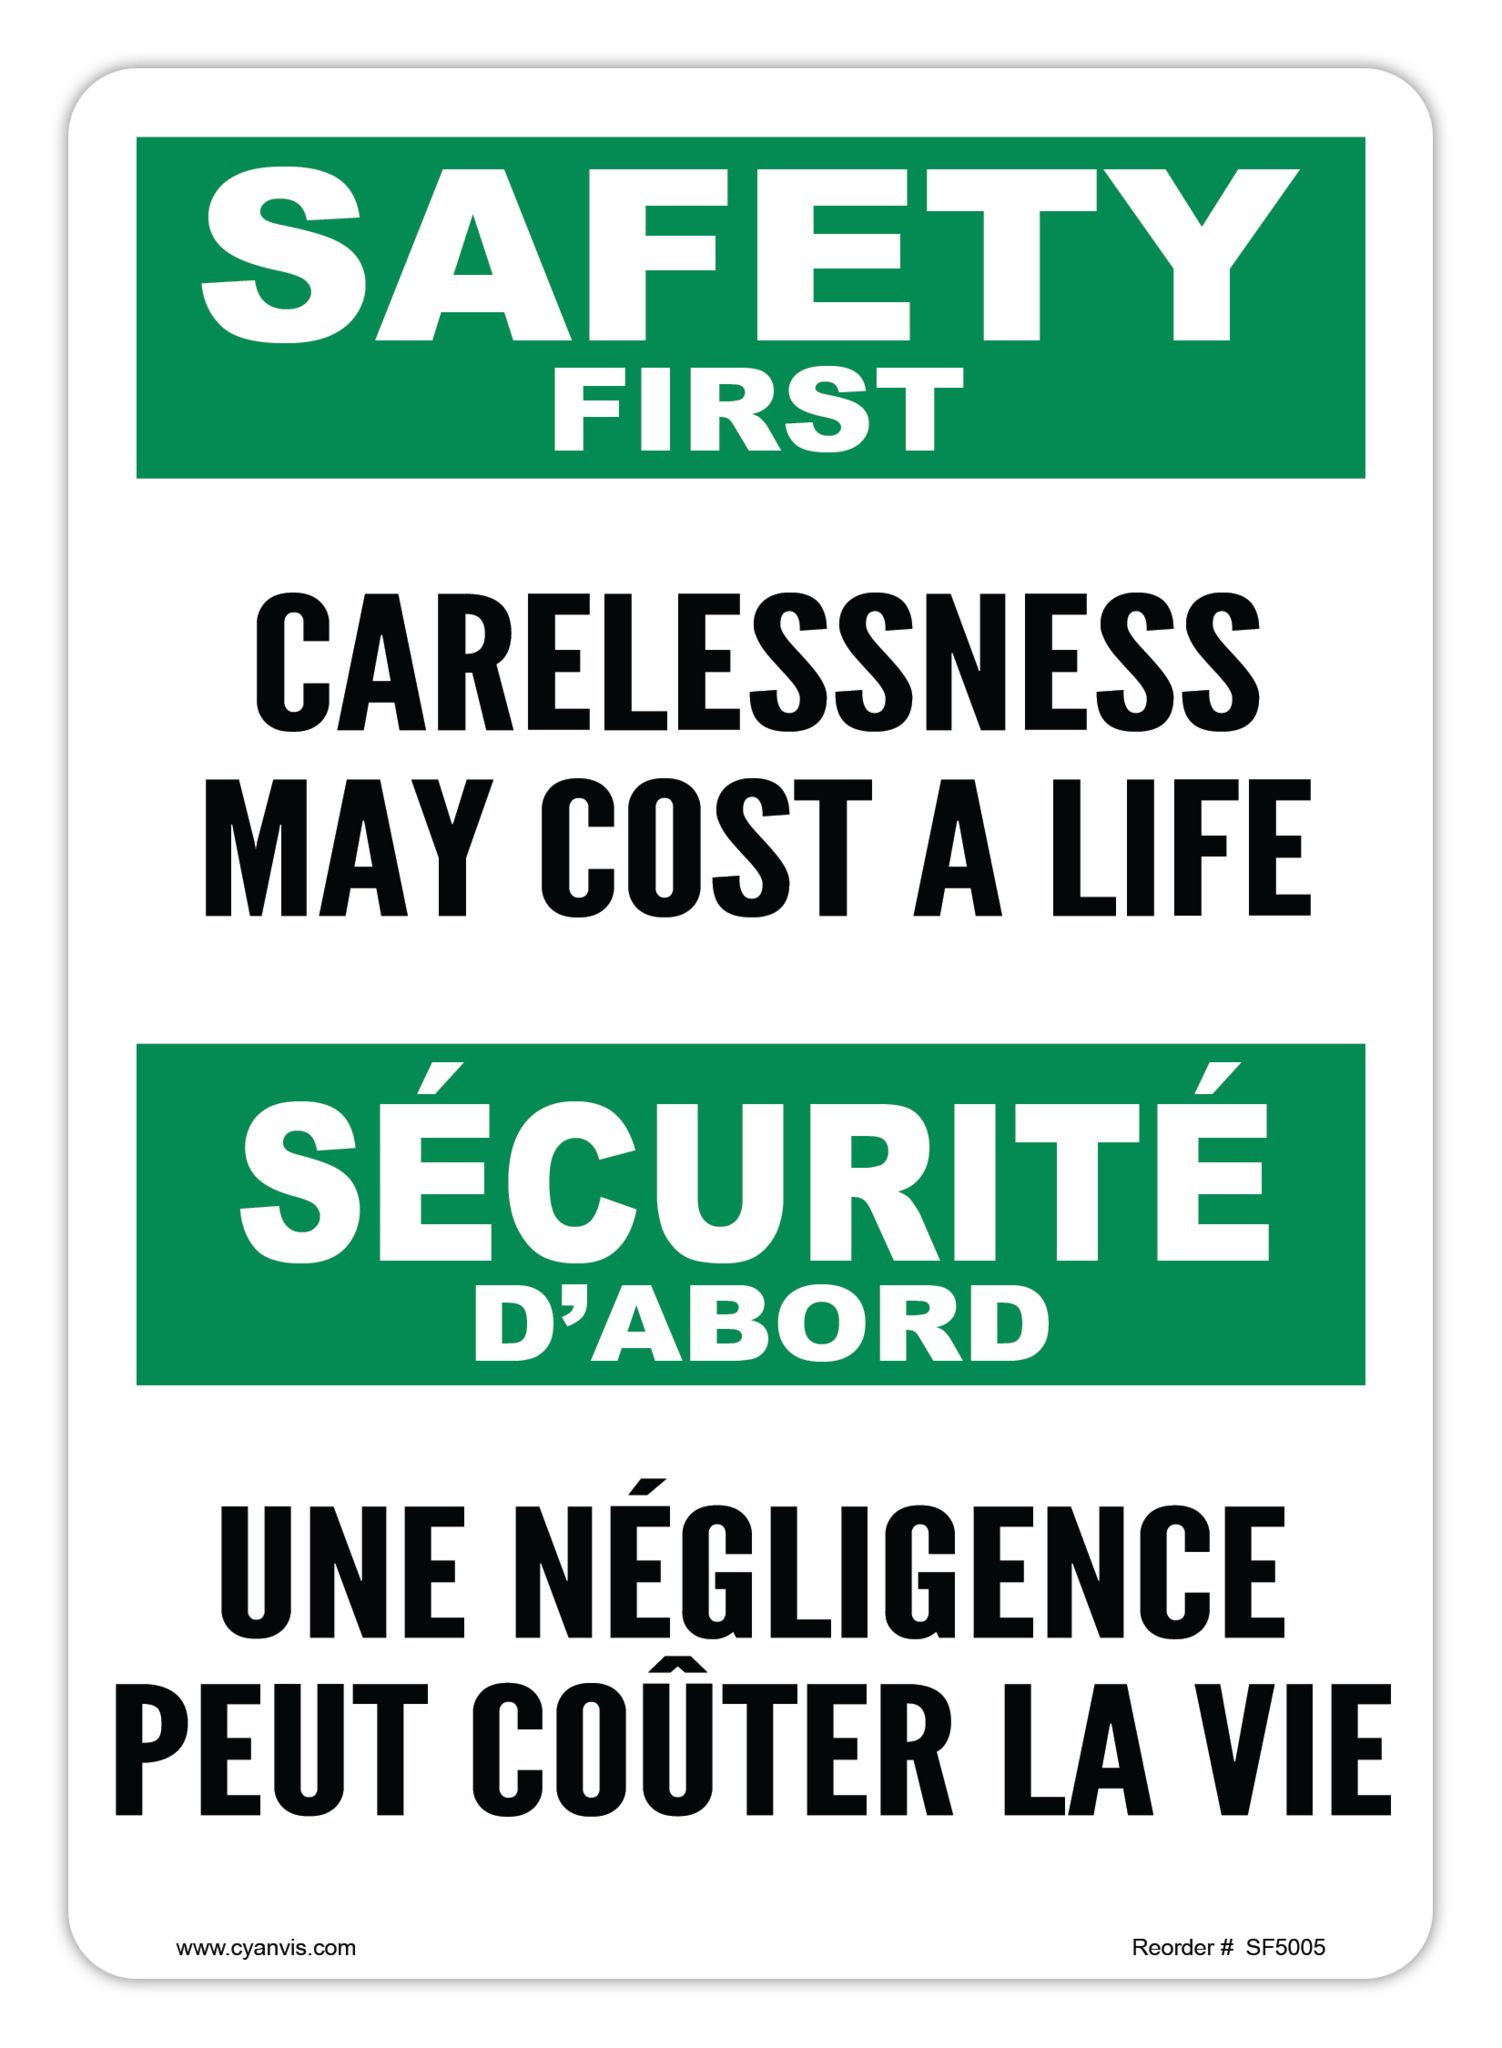 Safety Sign: Bilingual - Safety First - CARELESSNESS MAY COST A LIFE | UNE NÉGLIGENCE PEUT COÛTER LA VIE - CYANvisuals